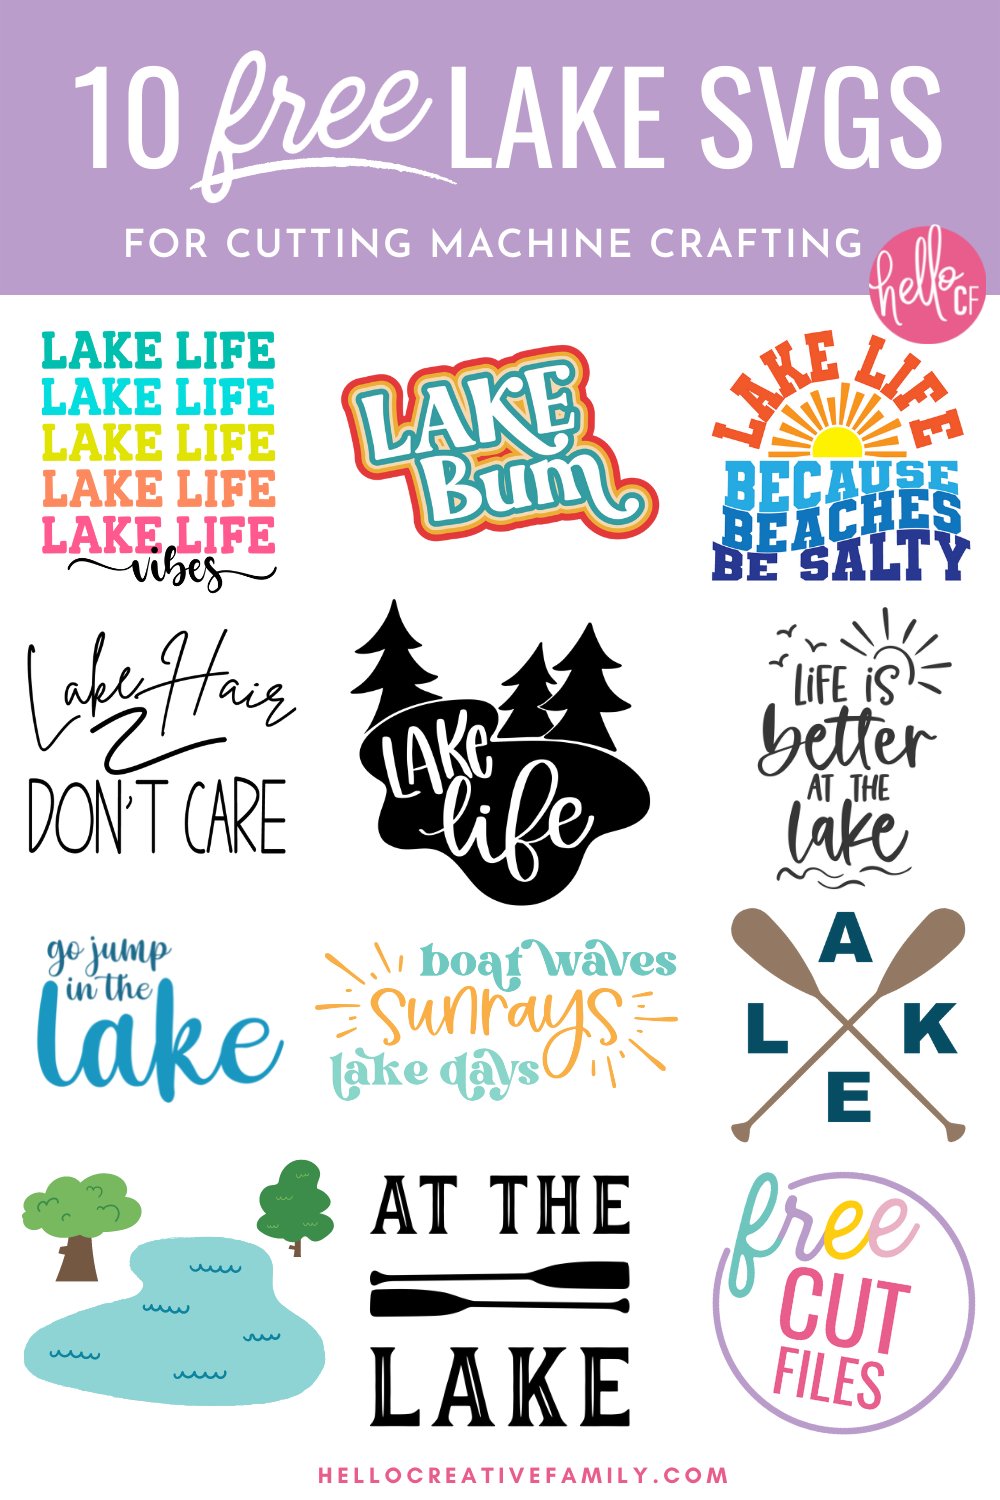 Get ready for summer and spending time at the beach, cottage or cabin with these 10 free Lake SVG Files including a Lake Life Vibes cut file! Make t-shirts, tank tops, hats, beach bags, mugs and all kinds of DIY summer gear using these free lake cut files and your Cricut Maker, Cricut Explore or Cricut Joy!